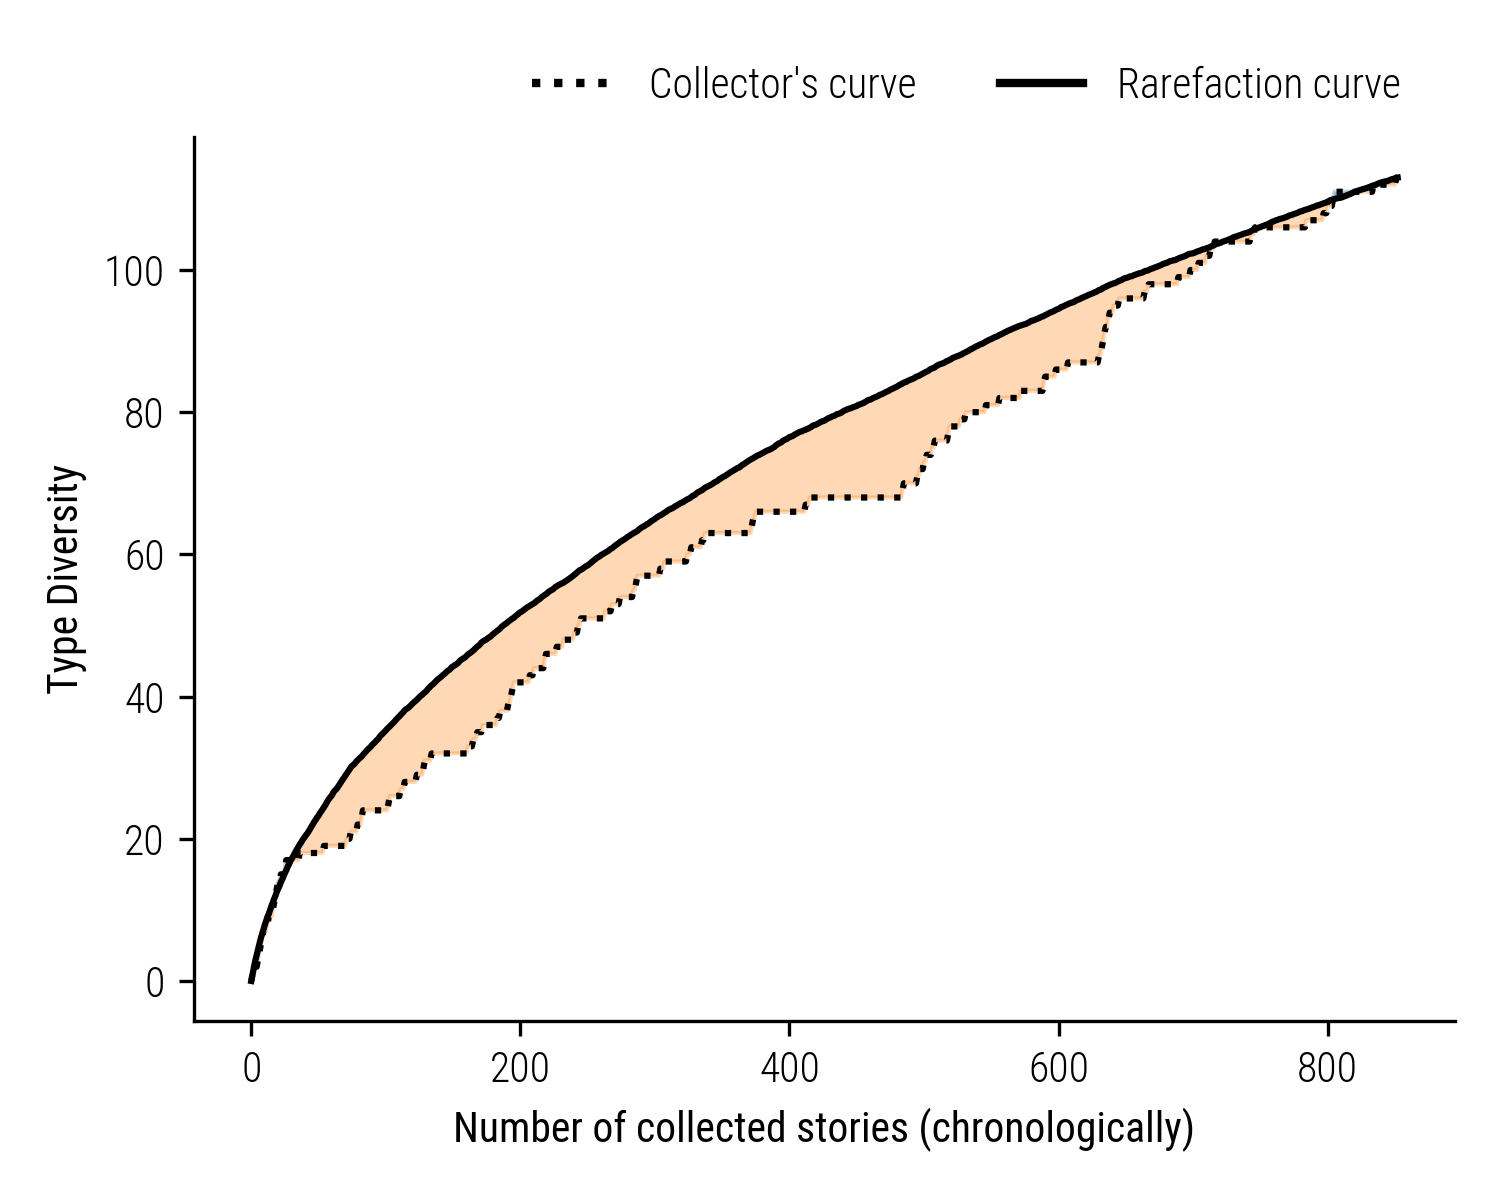 Figure 3: Collector Wever&rsquo;s Bias Illustrated: The dotted line represents Wever&rsquo;s actual diversity of collected stories, while the solid line is the theoretical rarefaction curve. The orange area shows segments of conservative collecting, with a preference for familiar story types.